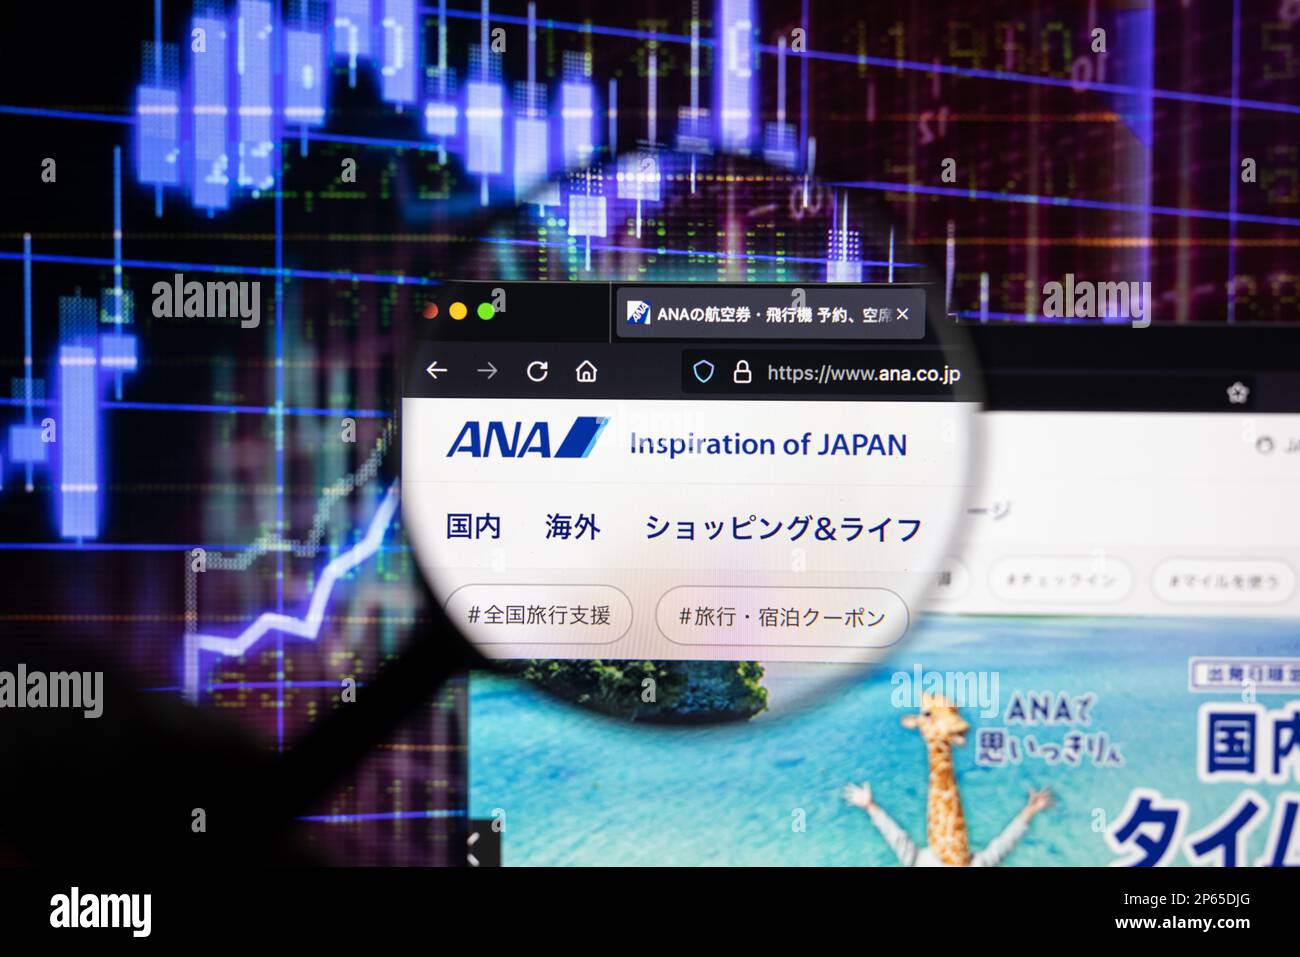 ANA airline company logo on a website with blurry stock market developments in the background, seen on a computer screen through a magnifying glass Stock Photo